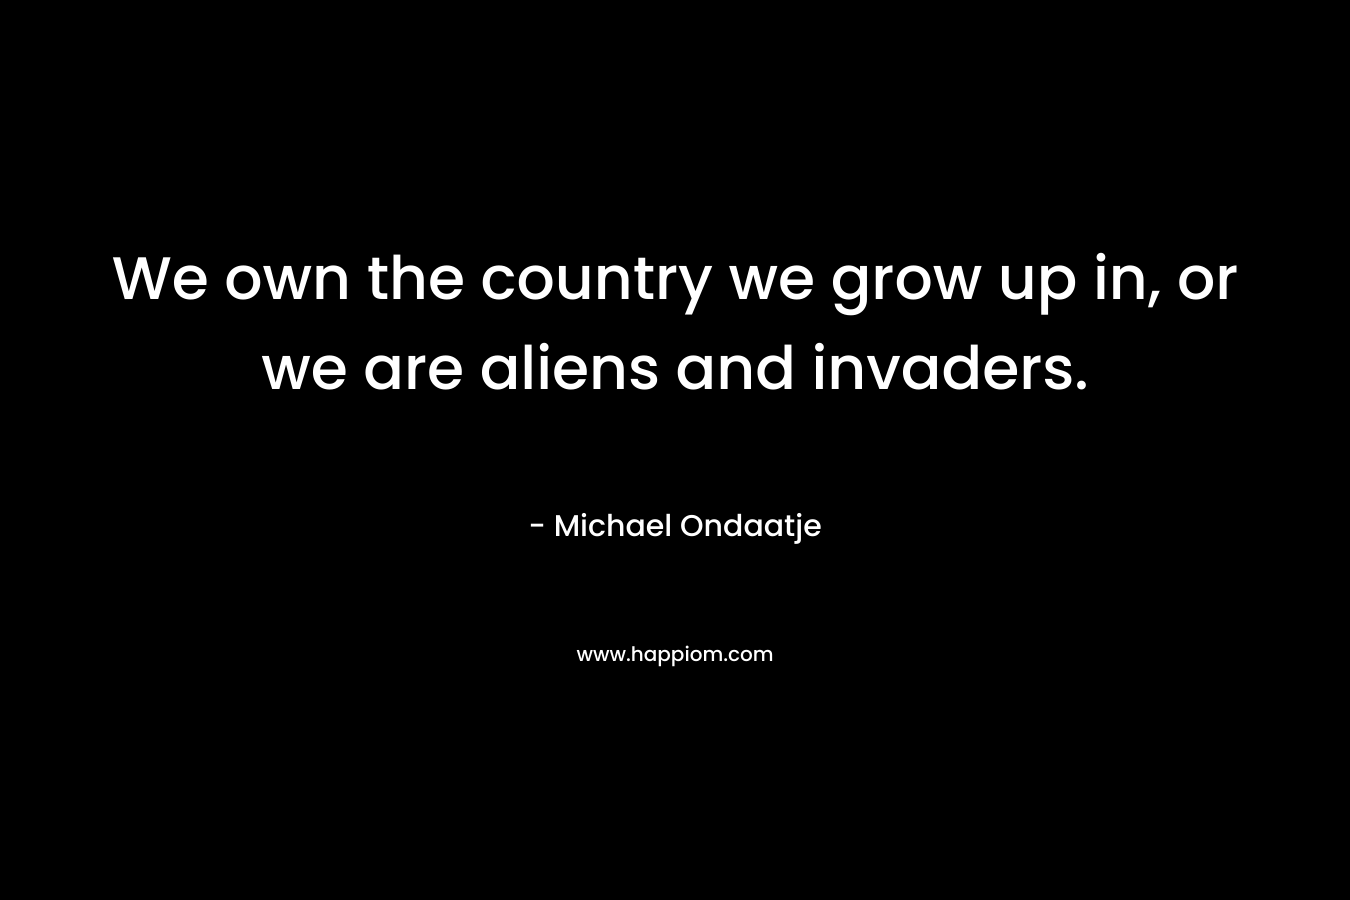 We own the country we grow up in, or we are aliens and invaders.